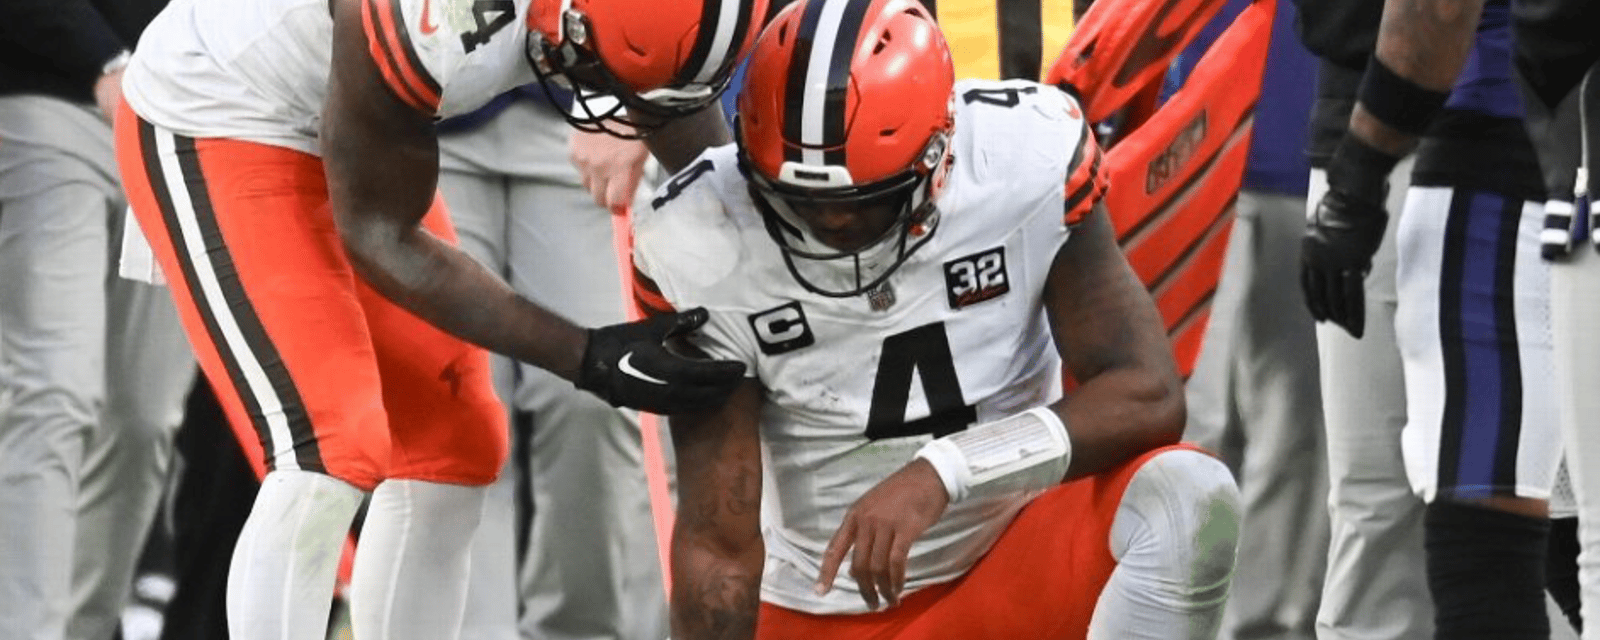 The worst is confirmed for Browns QB DeShaun Watson